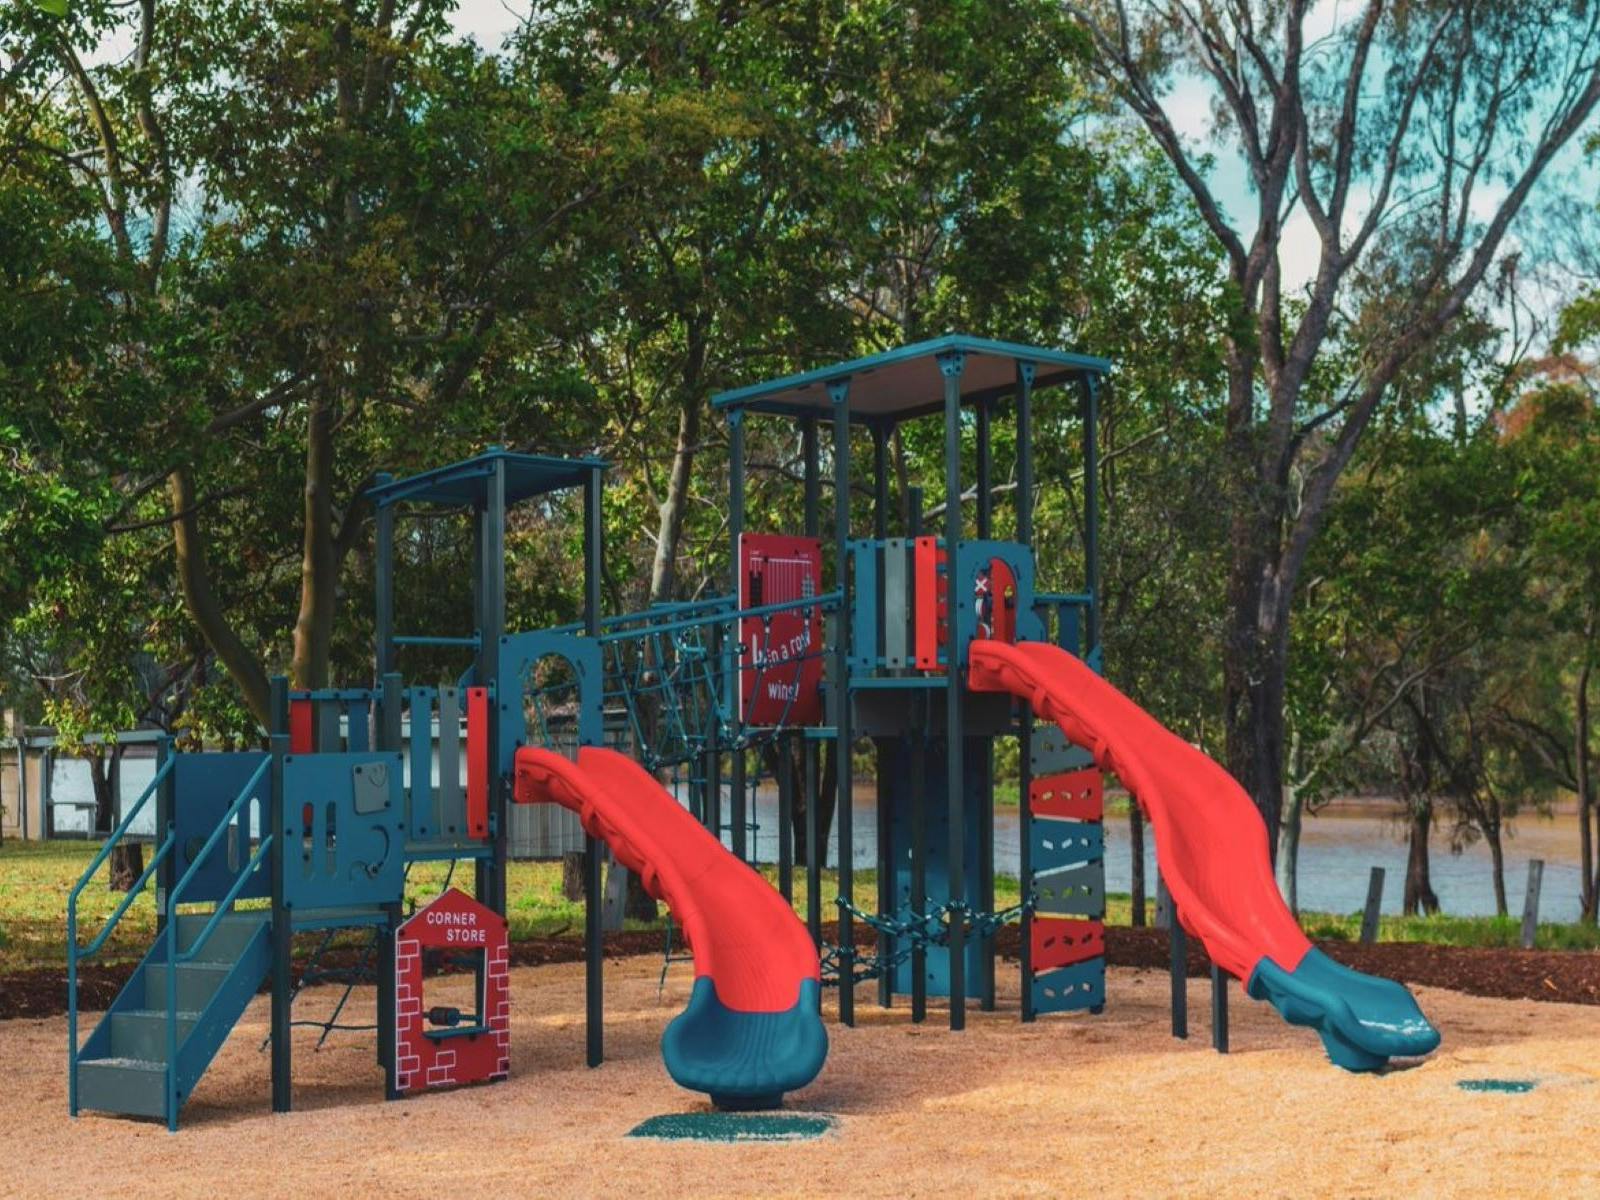 Playground facilities to keep the children entertained